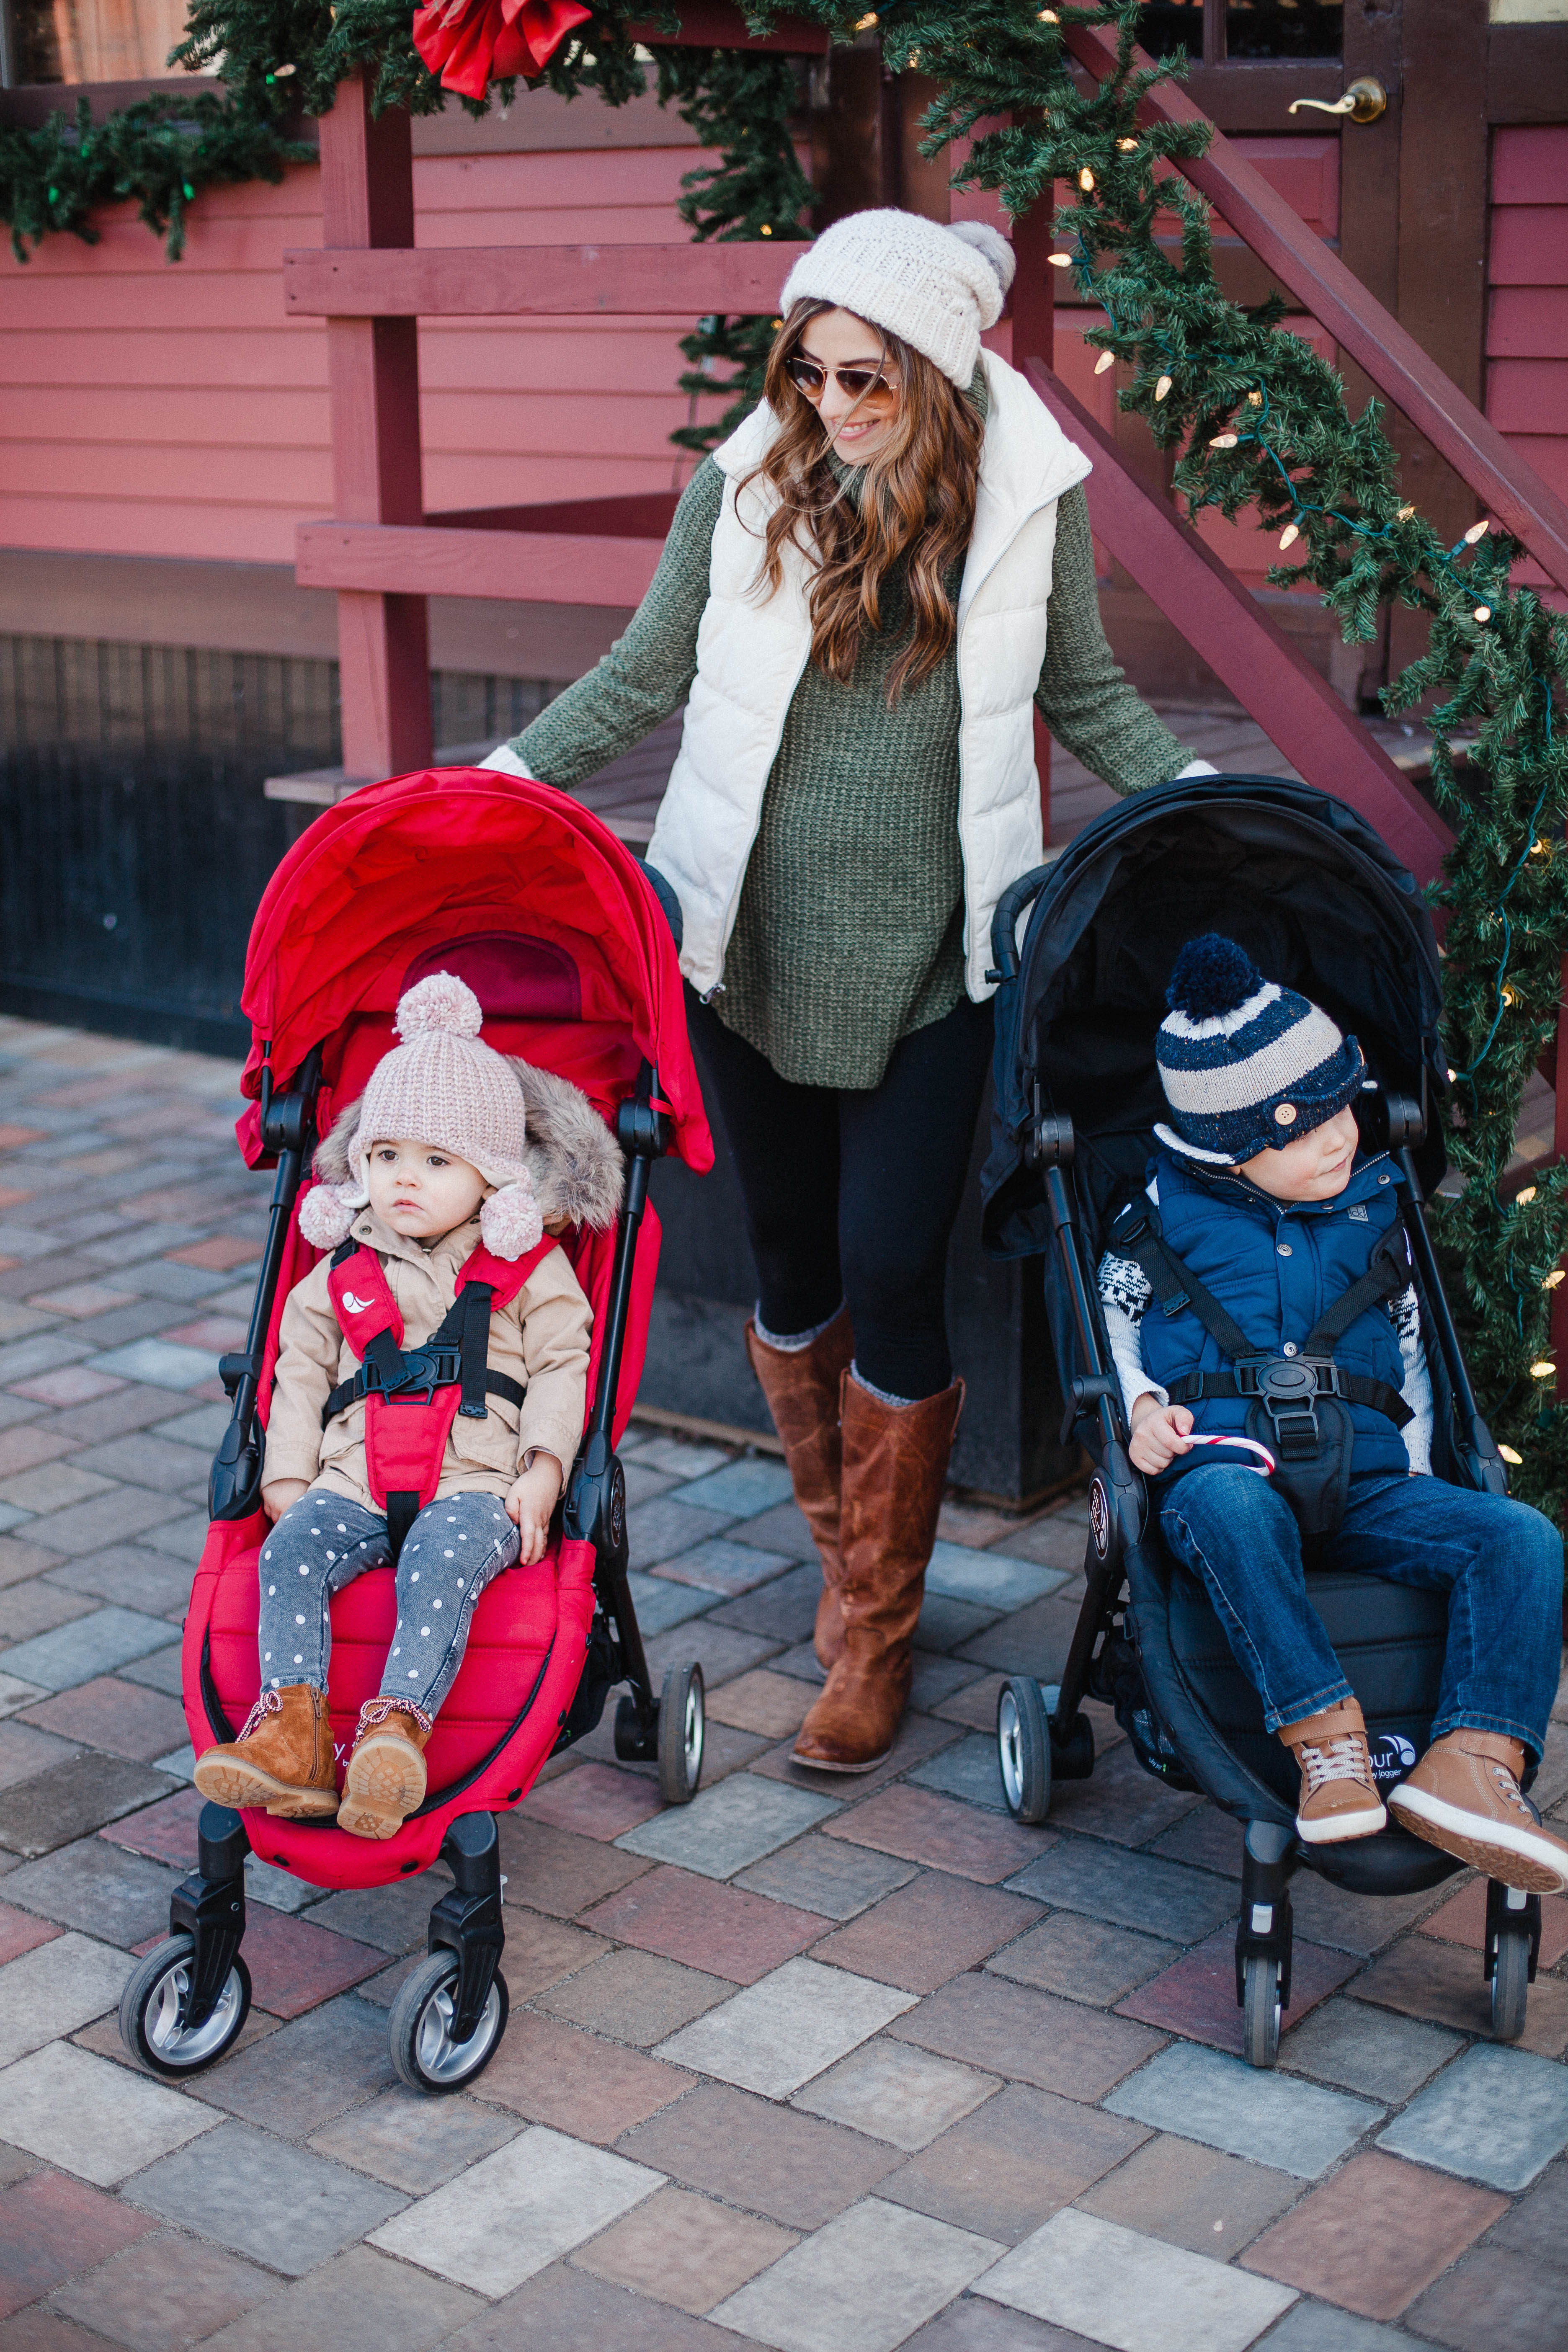 Life and style blogger Lauren McBride shares holiday activities with kids in Connecticut that are perfect for creating traditions with this season!